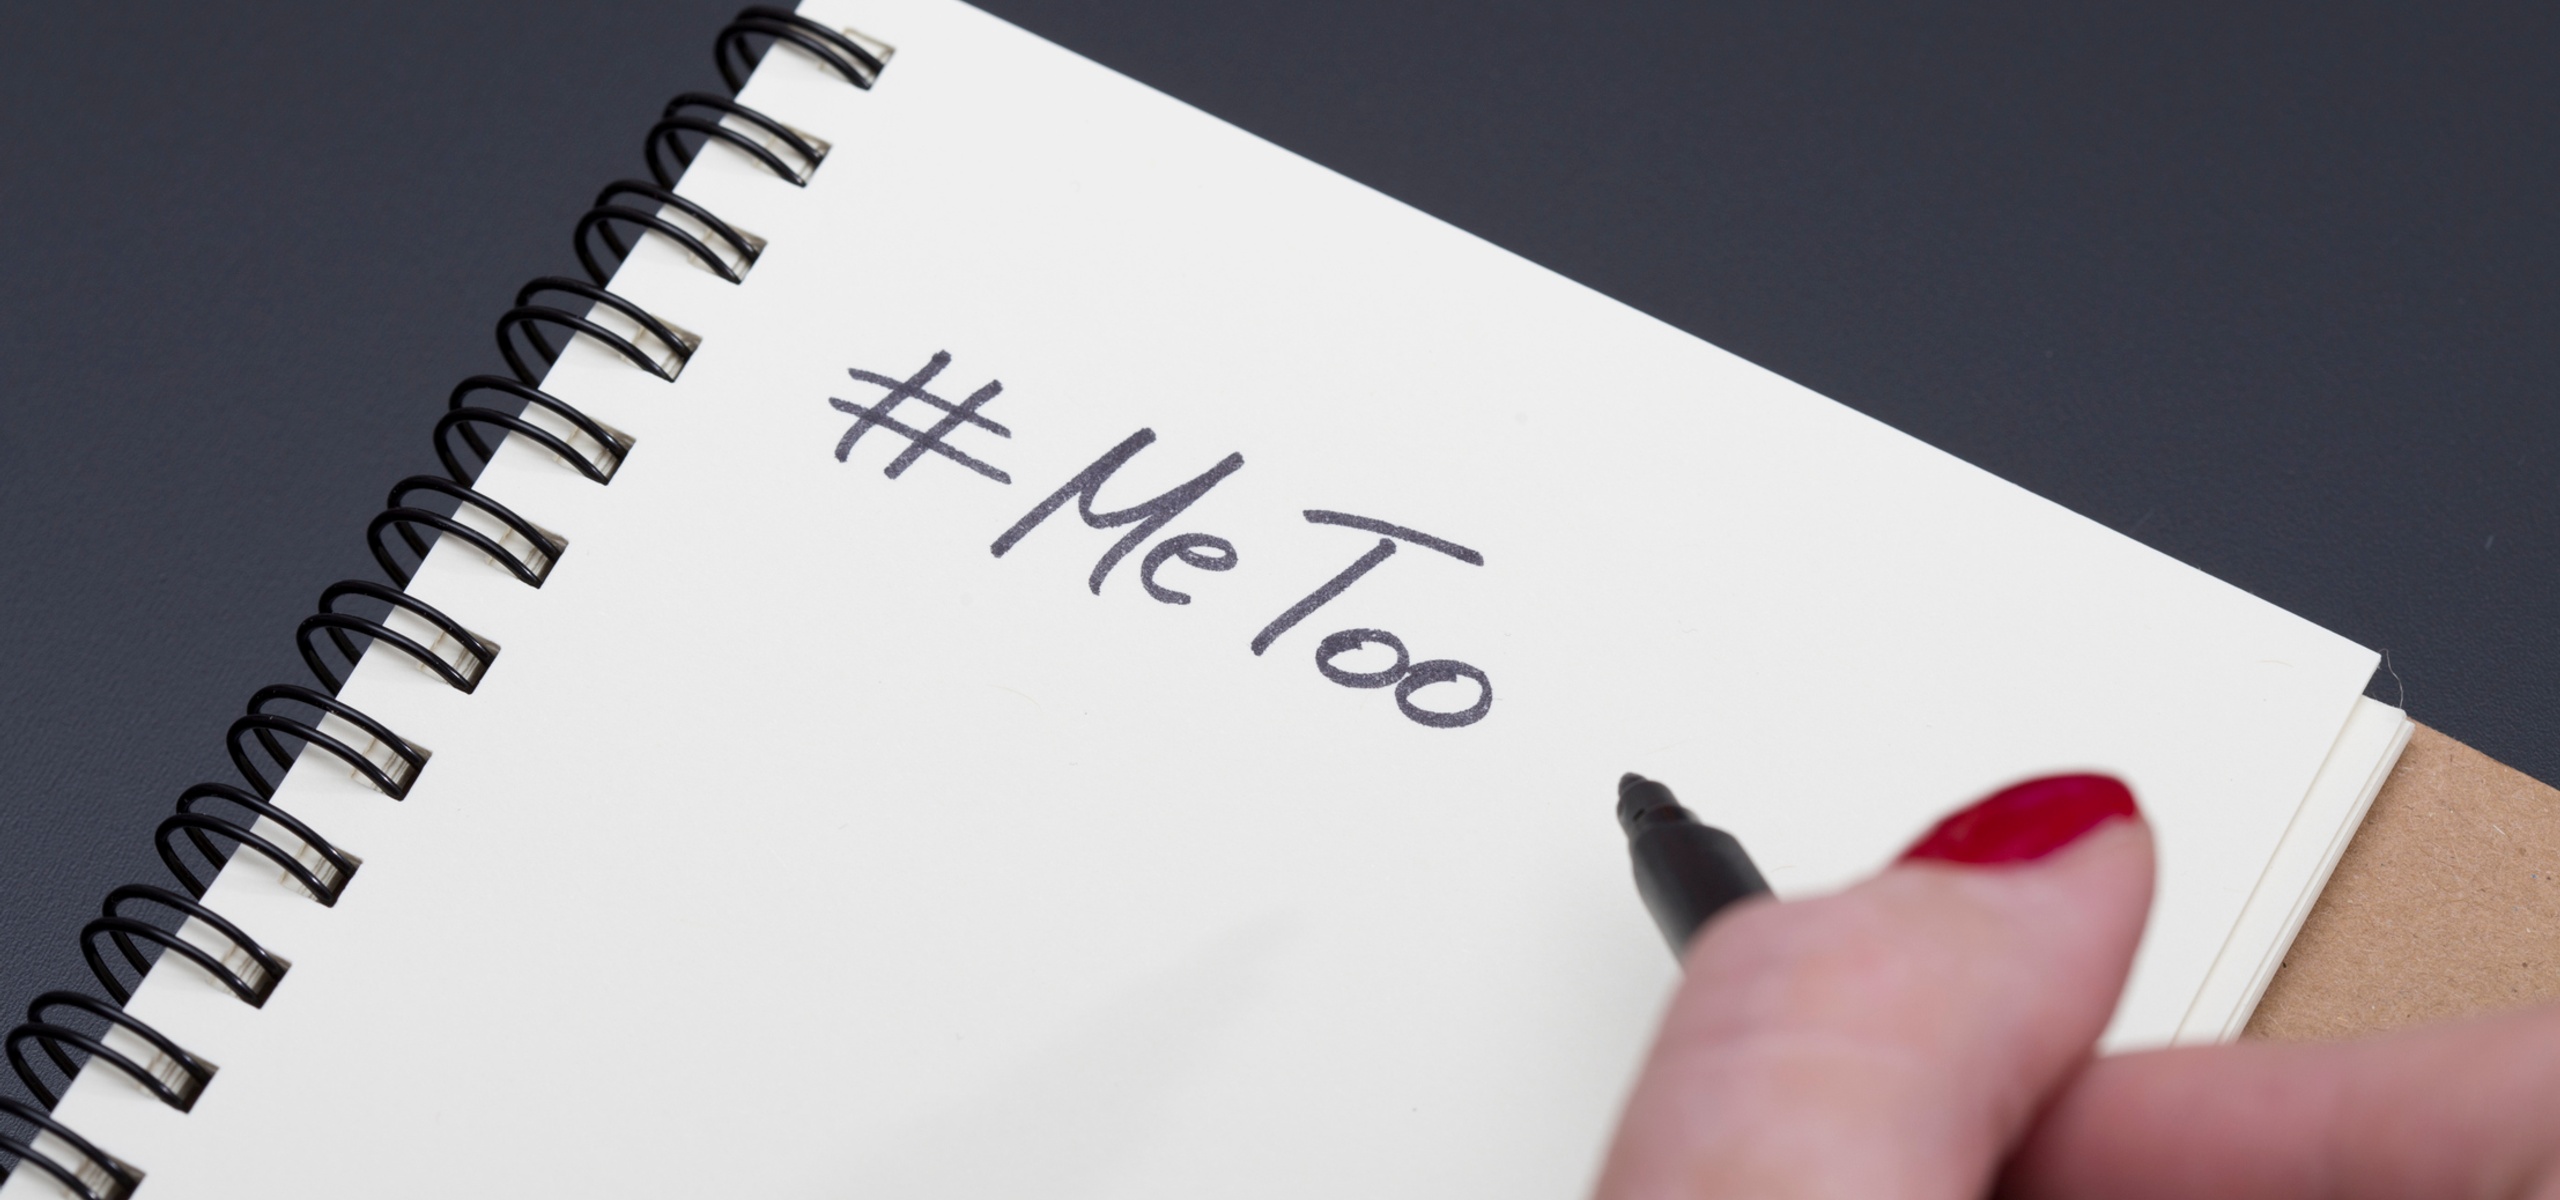 No, Naming and Shaming Sexual Offenders Doesn't Always Help